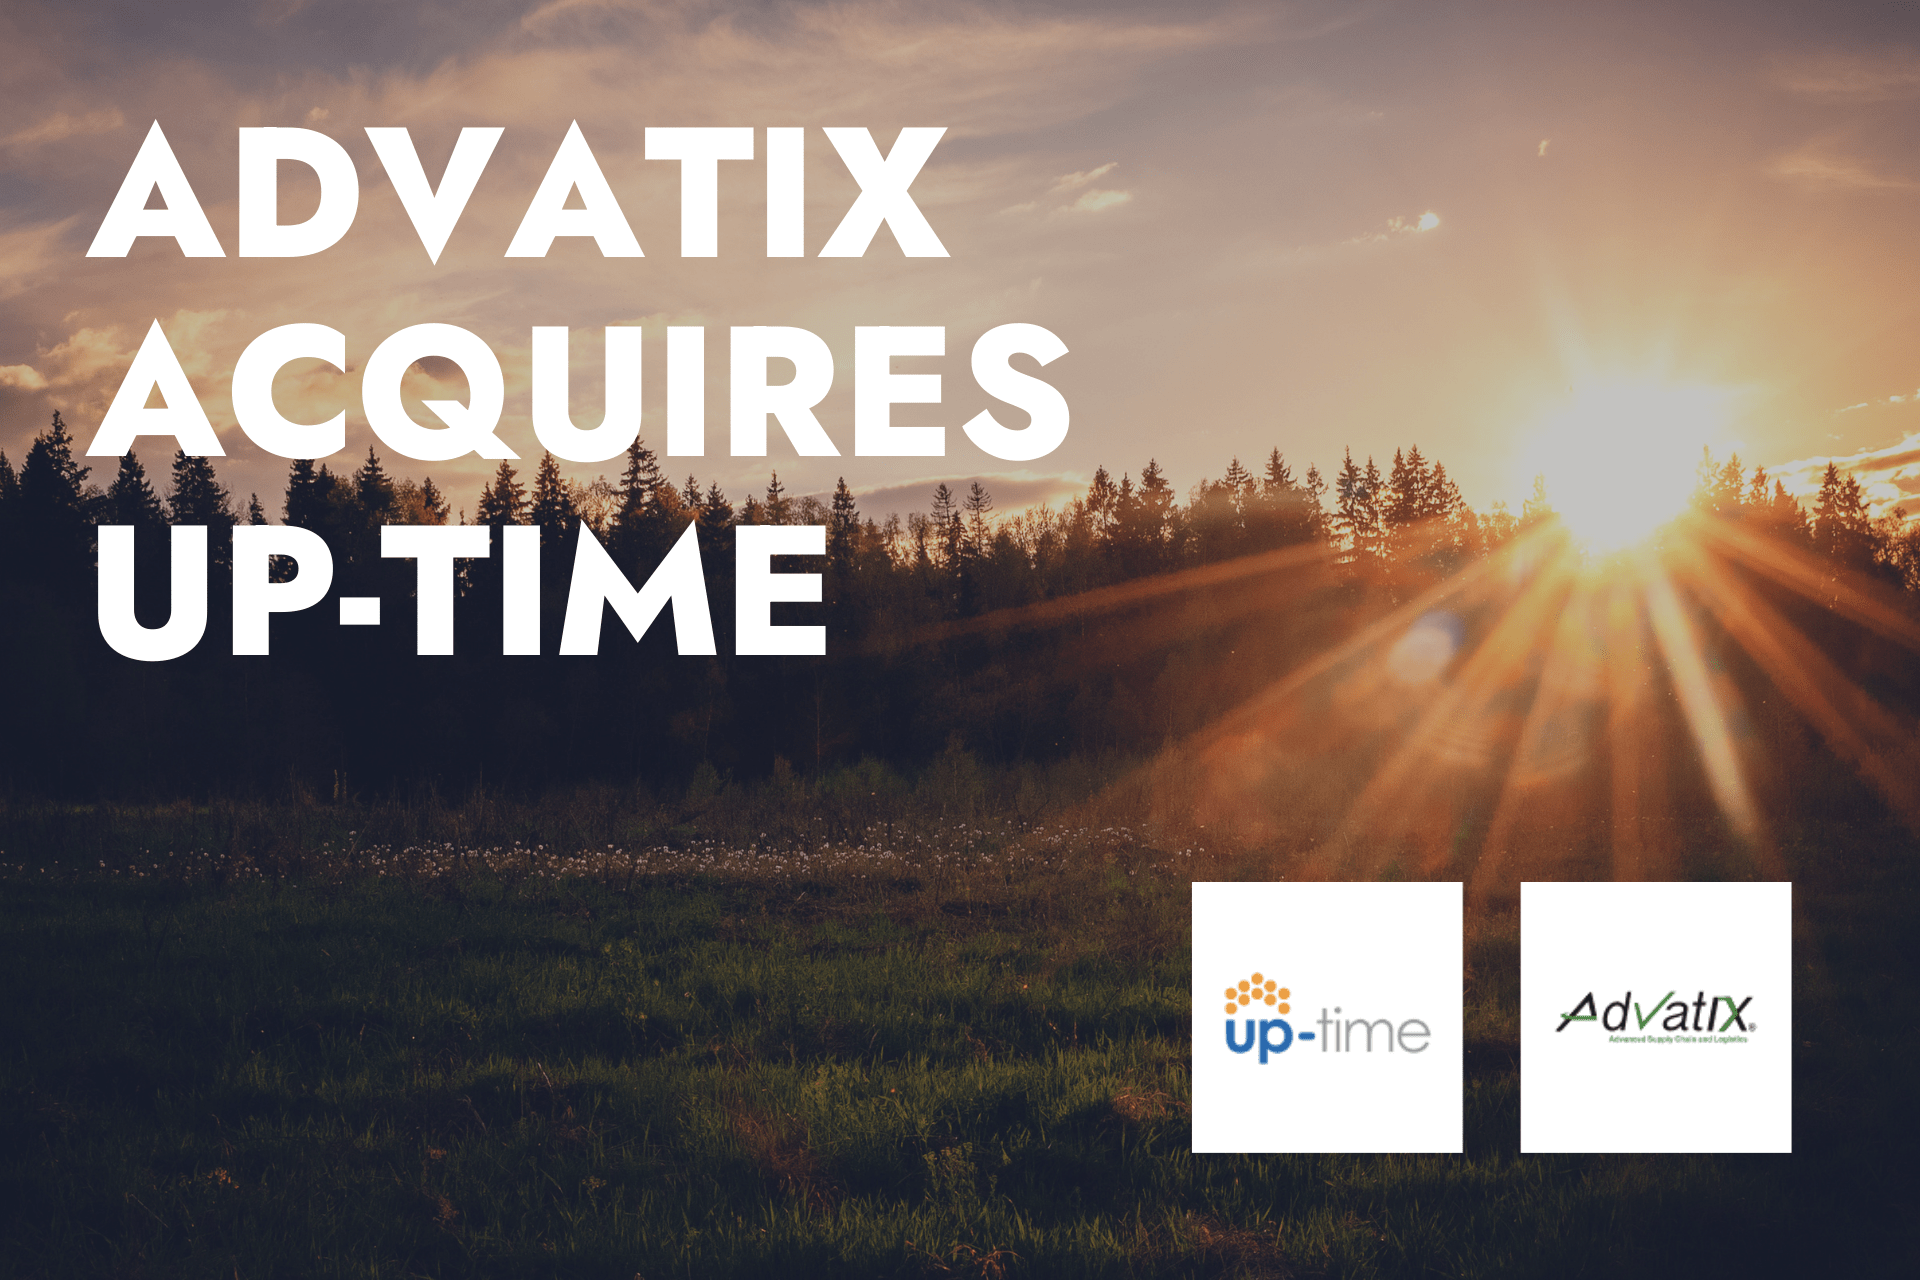 Advatix goes local in Latin America through acquisition of UP-Time.cl, an operations consulting company based in Santiago, Chile, bringing industry leading eCommerce solutions to Latin Am